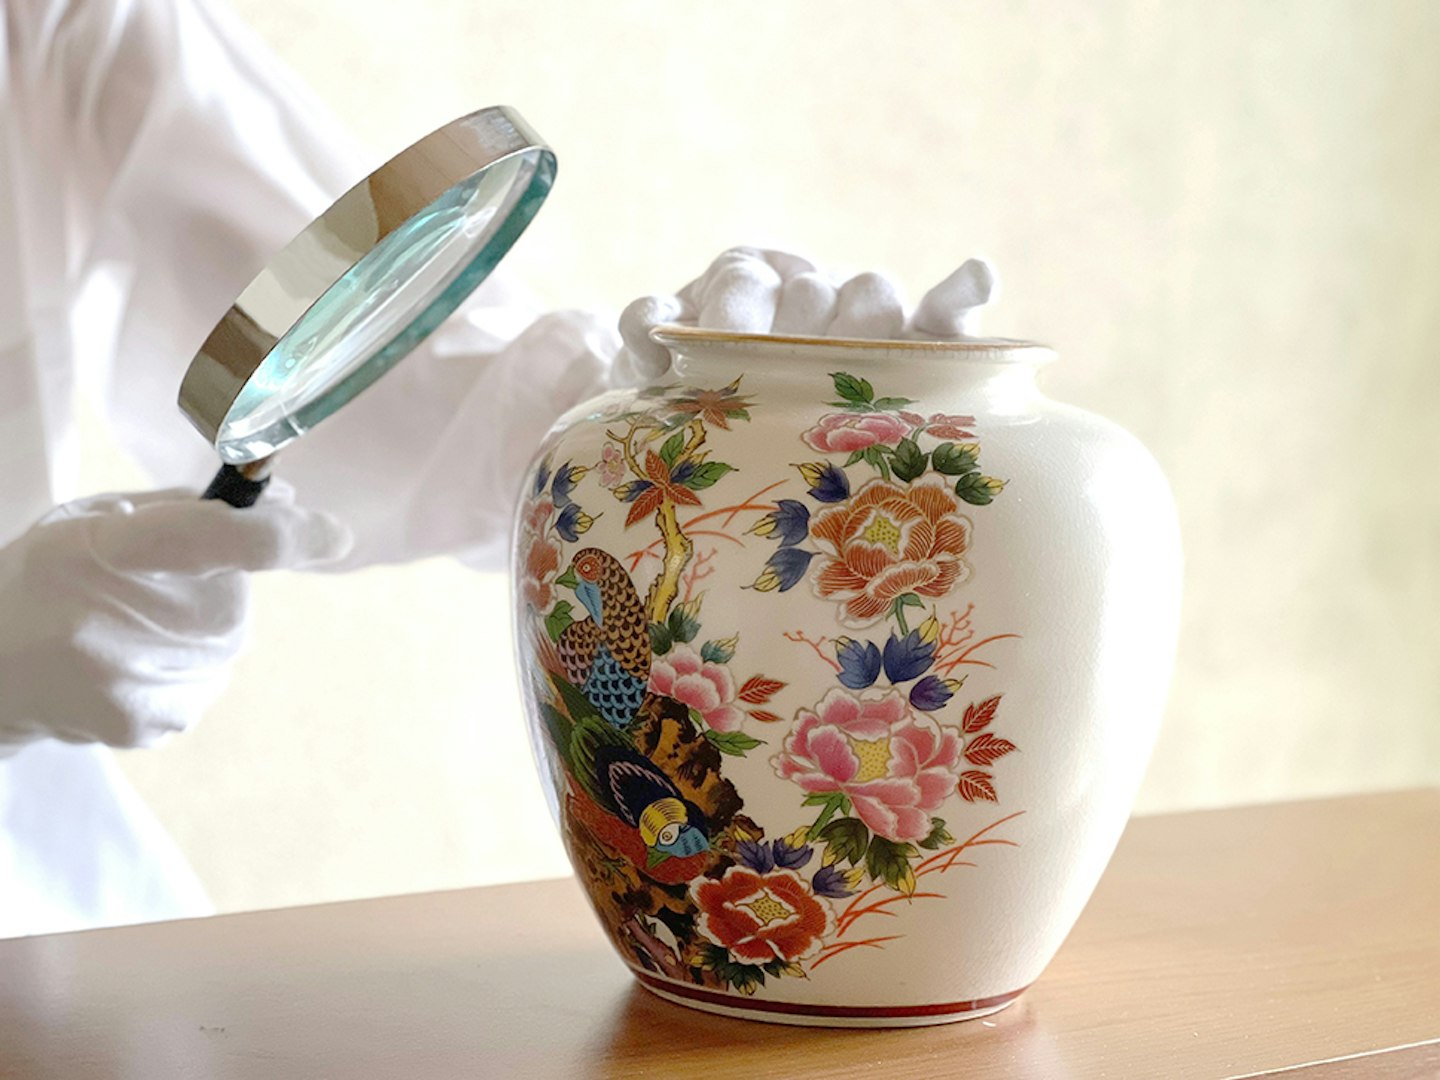 Hands with white gloves to appraise the jar with a magnifying mirror